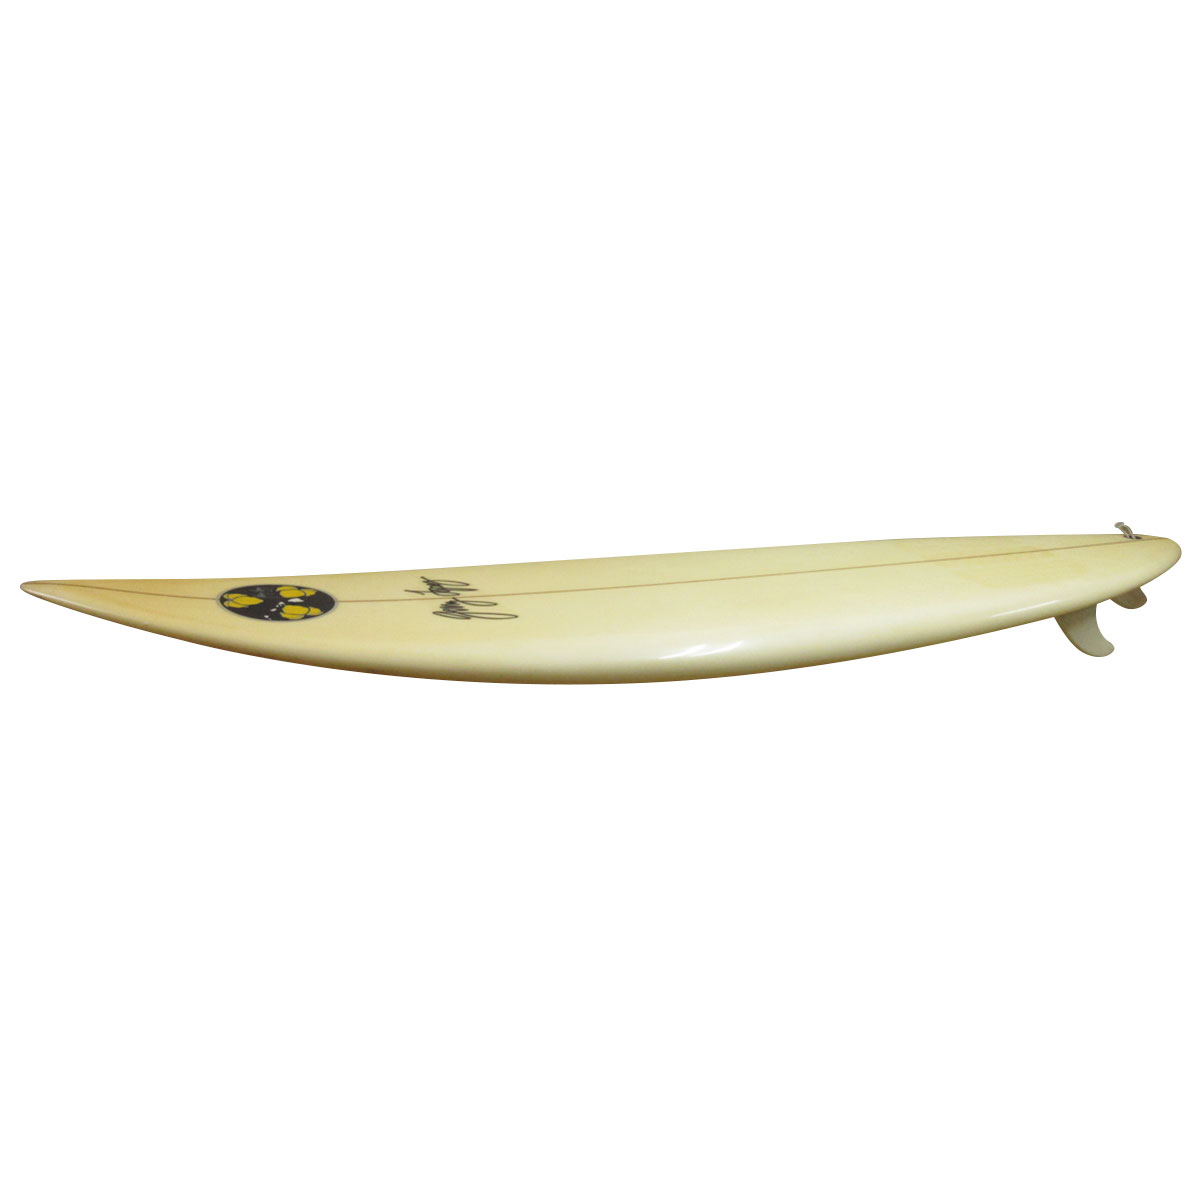 GERRY LOPEZ / Semi Gun 6`7 Shaped By Gerry Lopez | USED SURF×SURF 